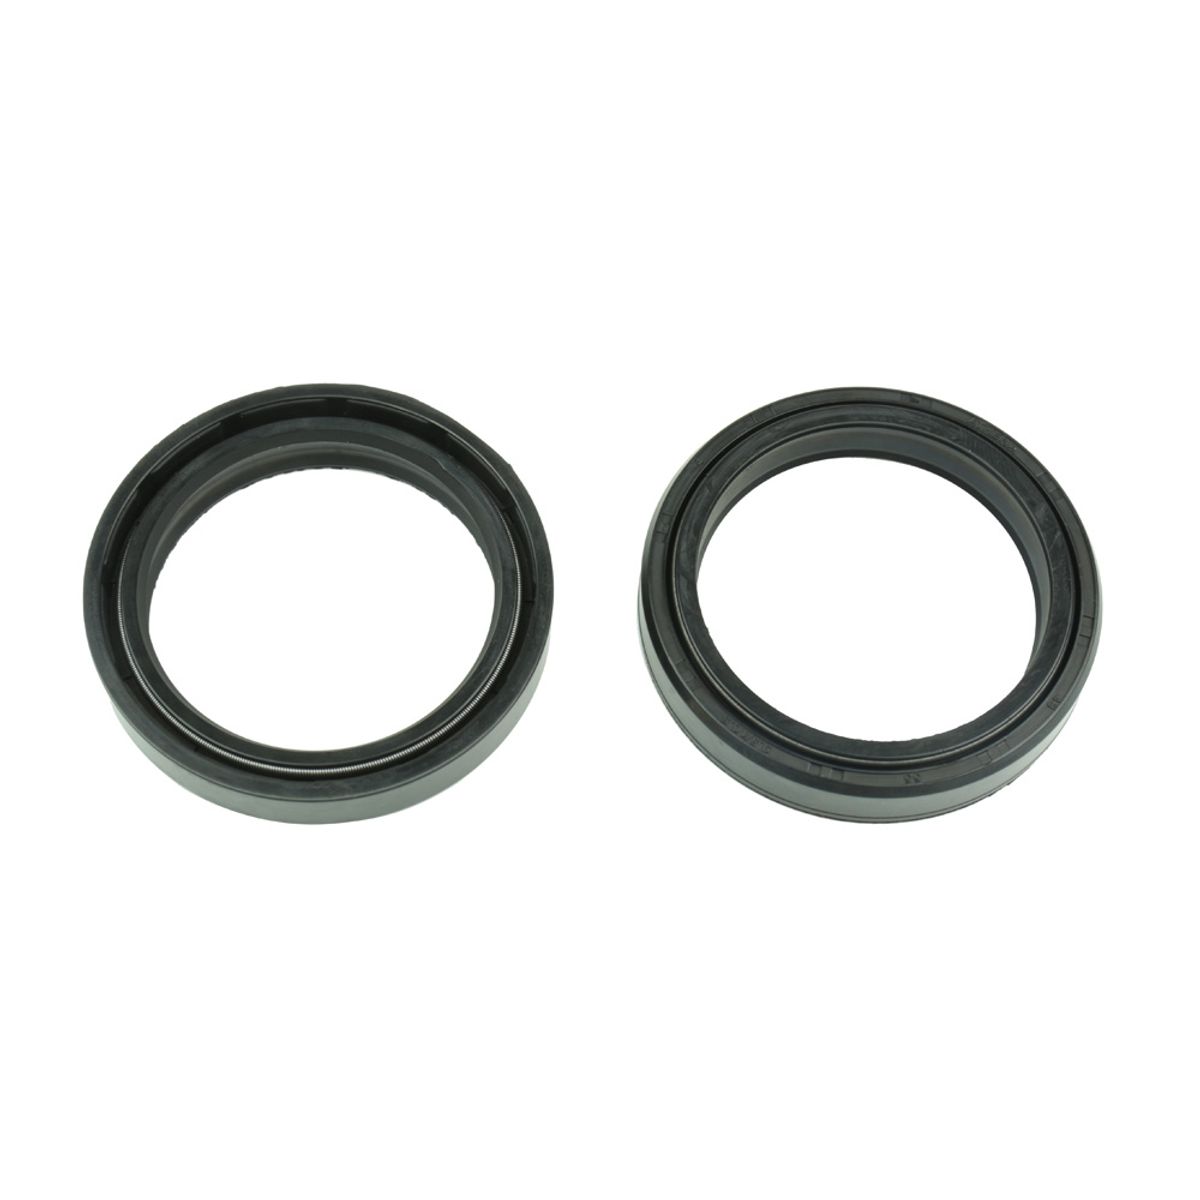 Fork Oil Seal Kit 43x55x9.5/10.5 mm - For 01-08 Suzuki GSXR1000 - Click Image to Close